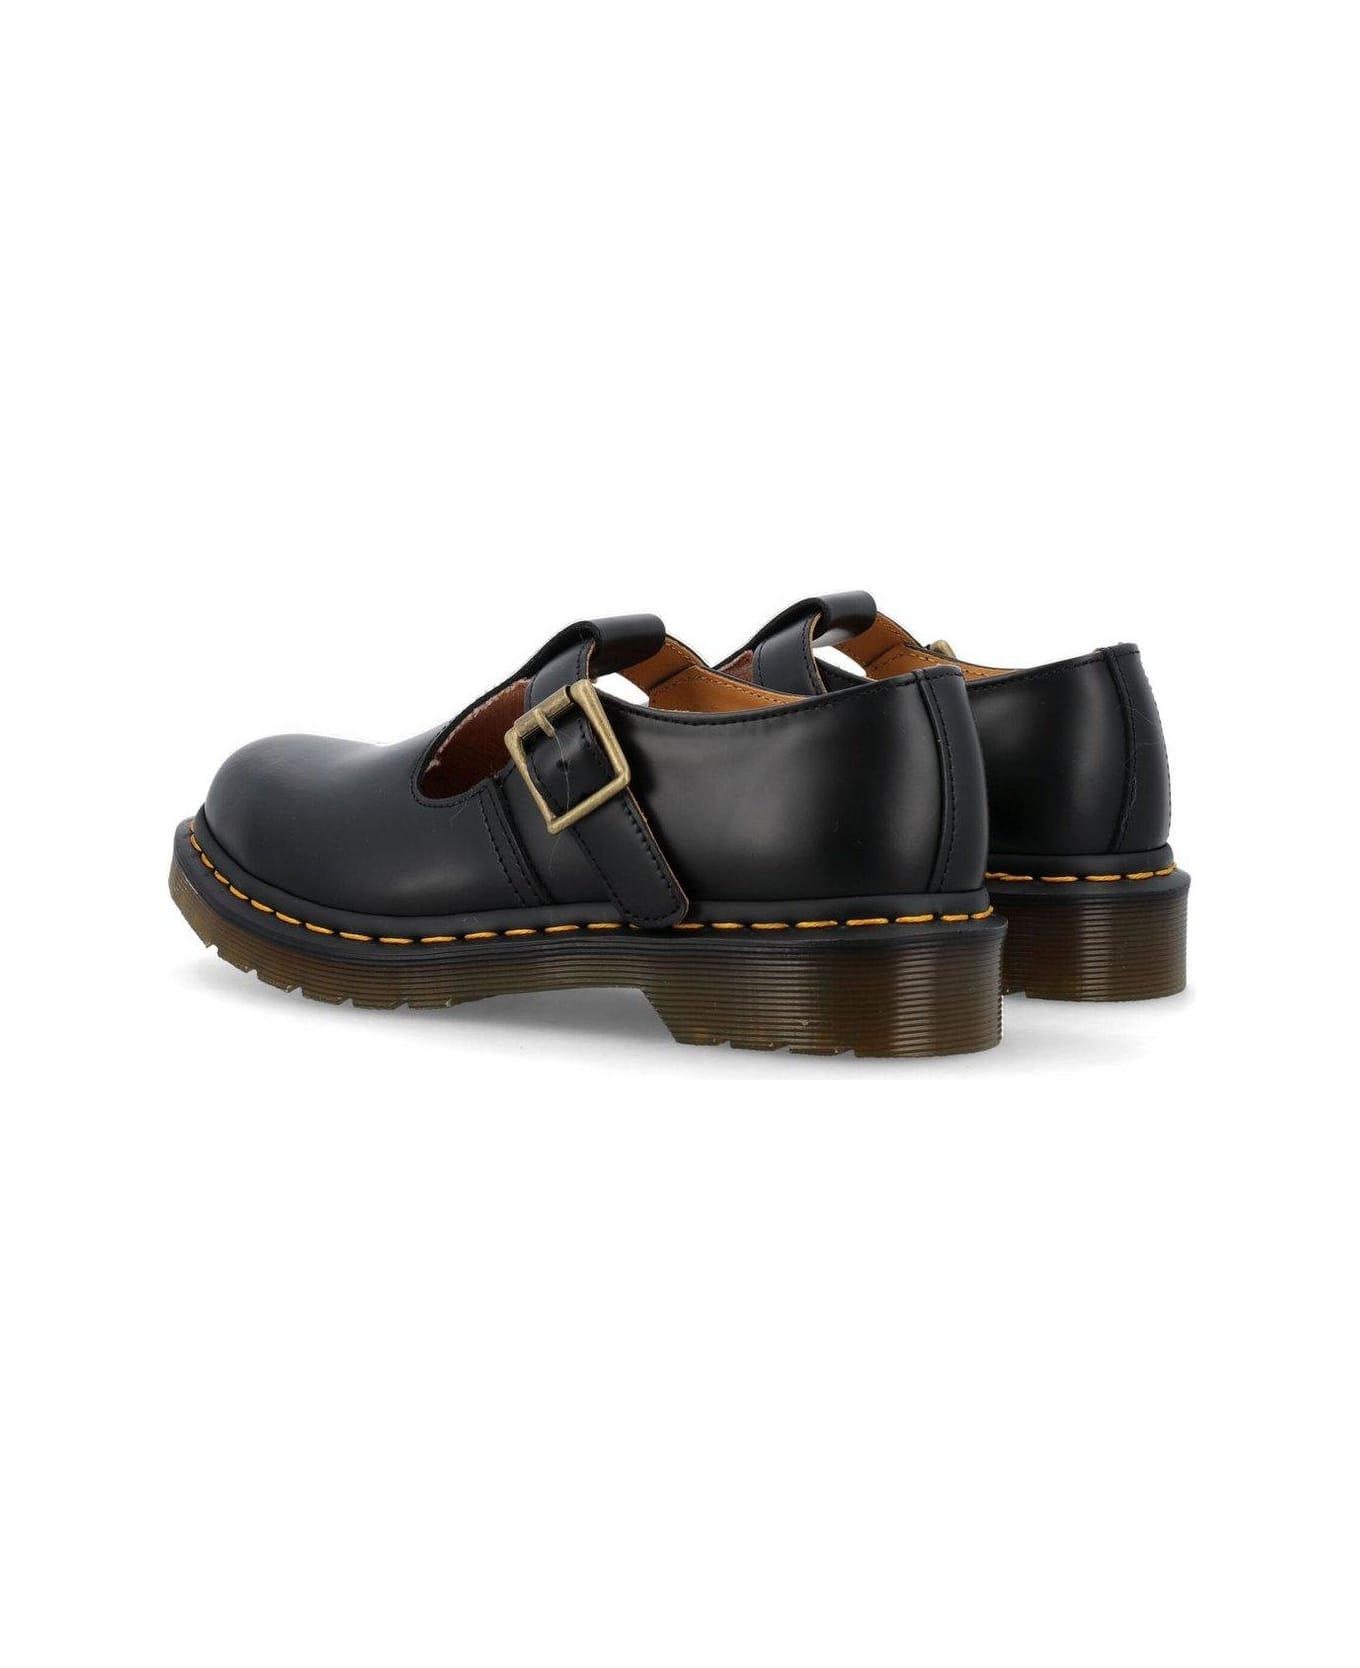 Dr. Martens Polley Mary Jane Flat Shoes - BLACK